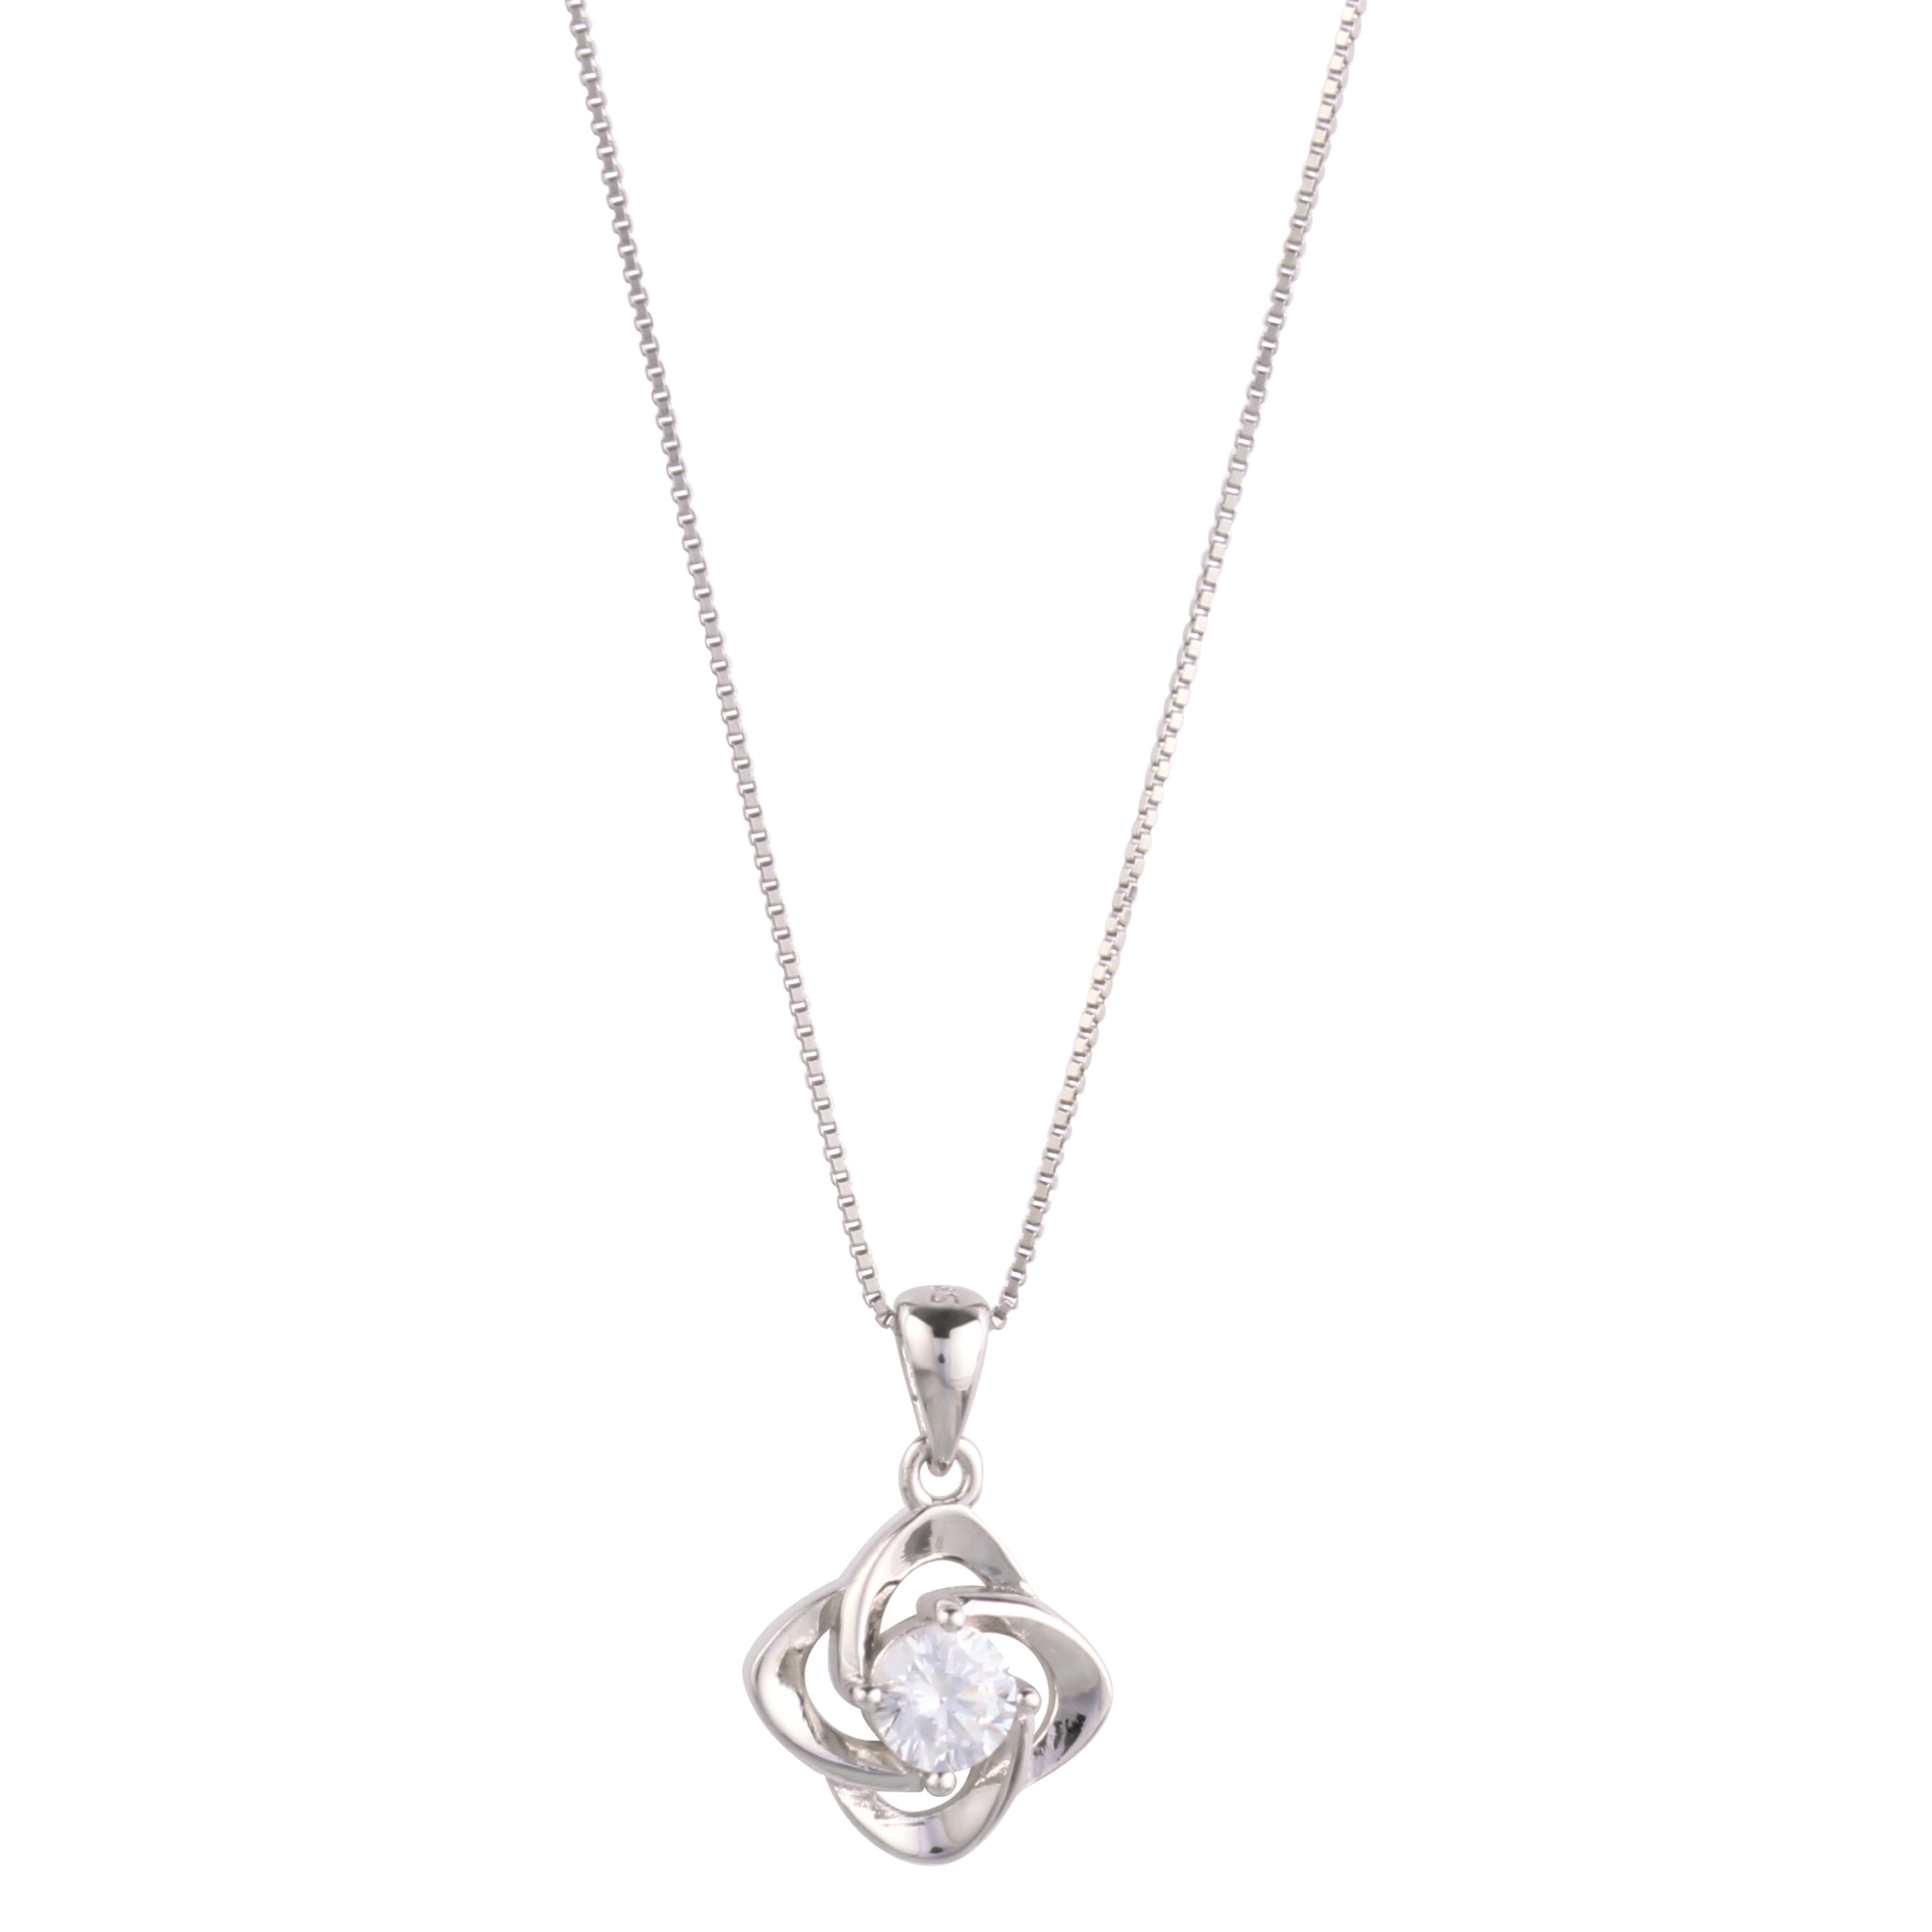 Mom Sterling Silver Love Knot Pendant Necklace